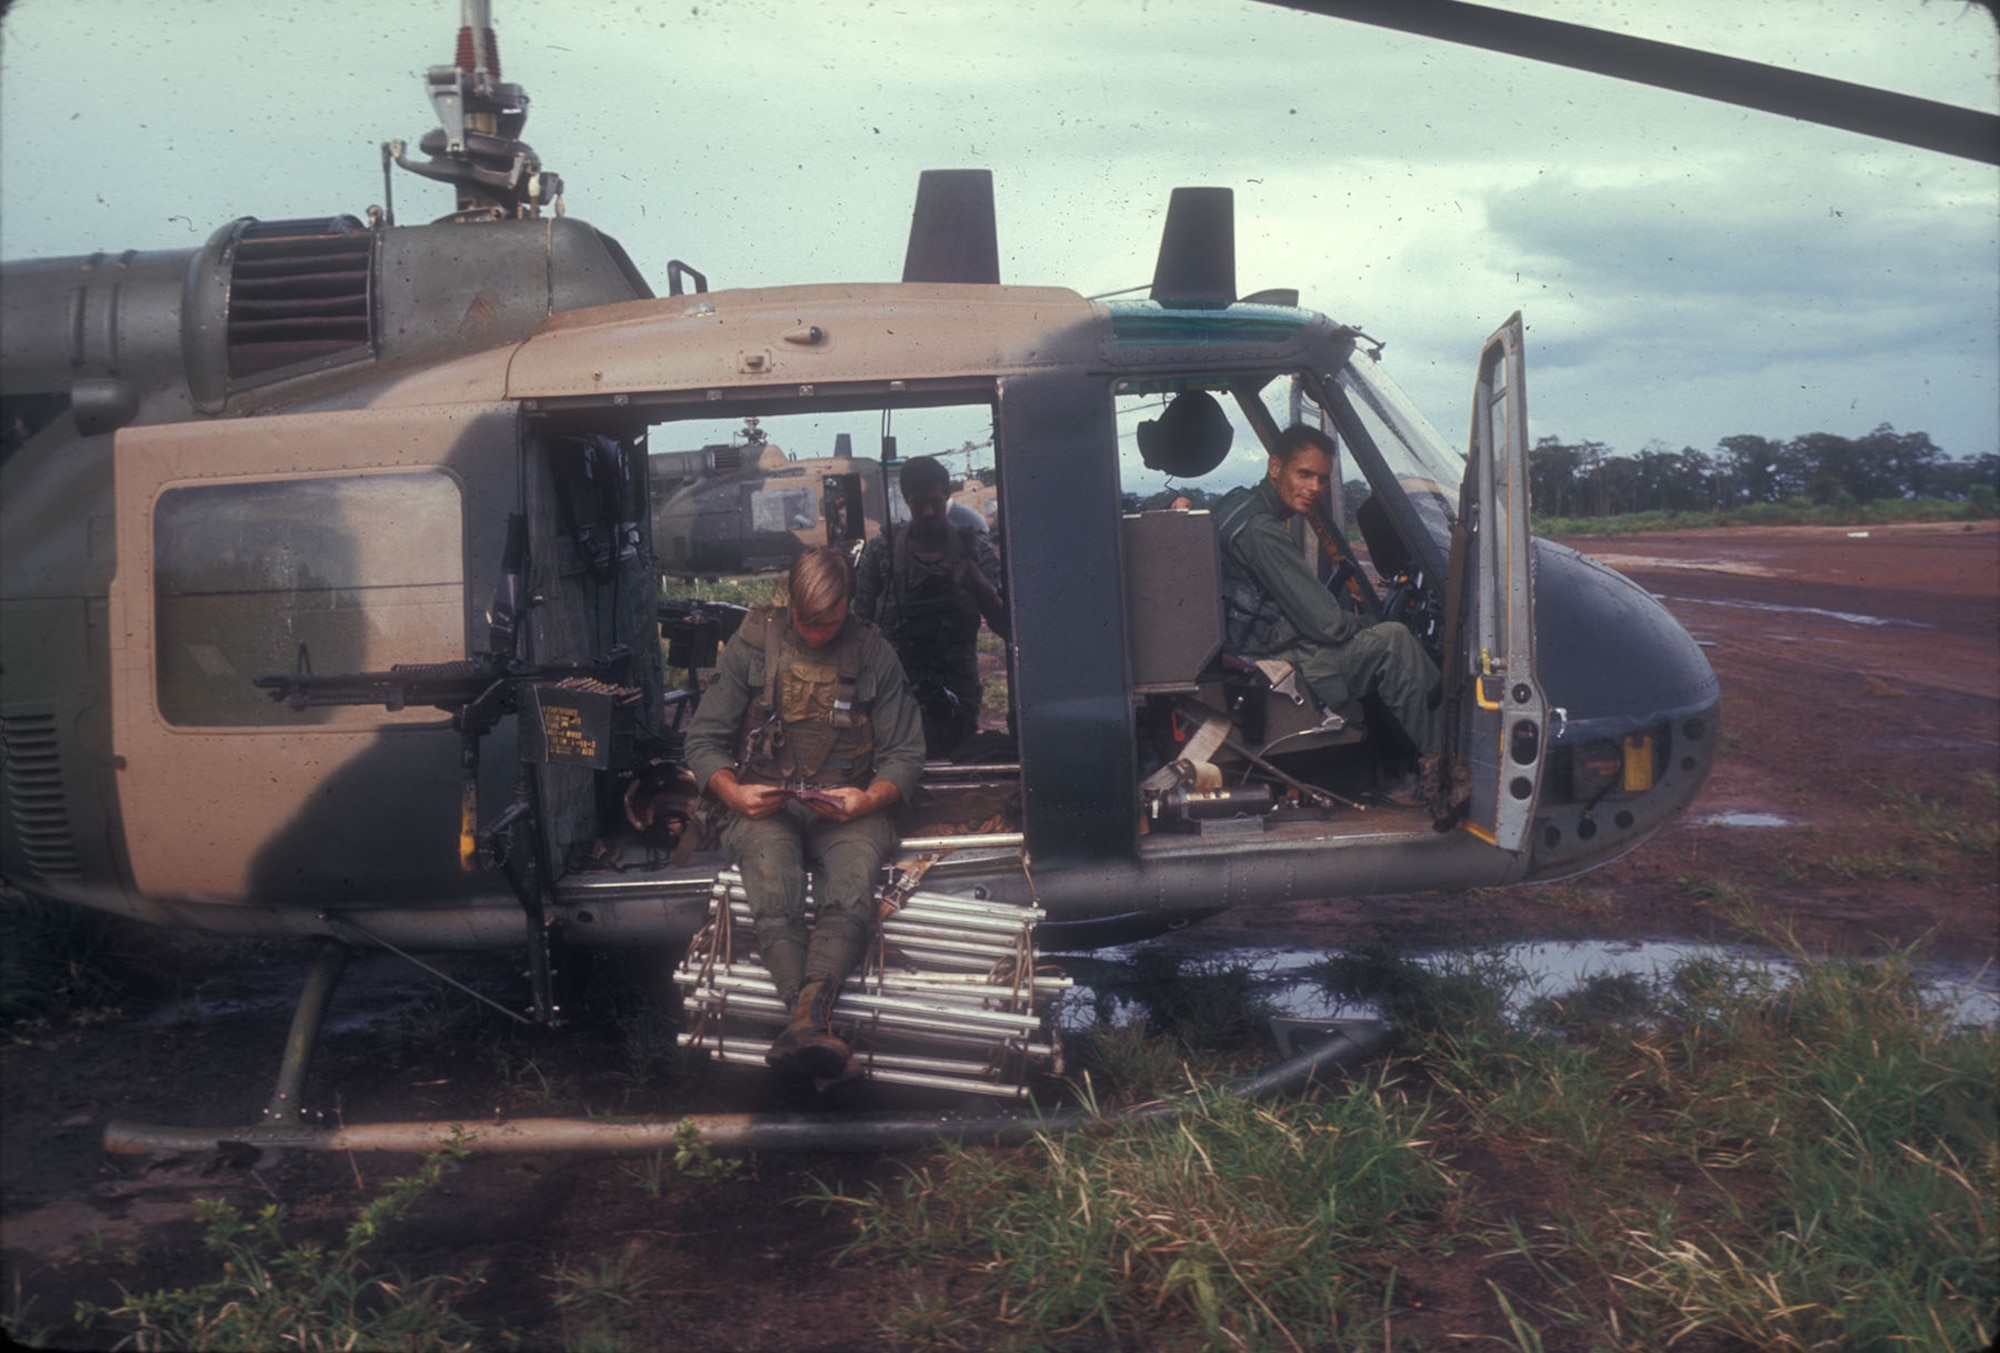 A UH-1 crew armed and ready for a covert mission. Notice the flexible ladder that could be extended to pick up personnel when the helicopter could not land. (U.S. Air Force photo)